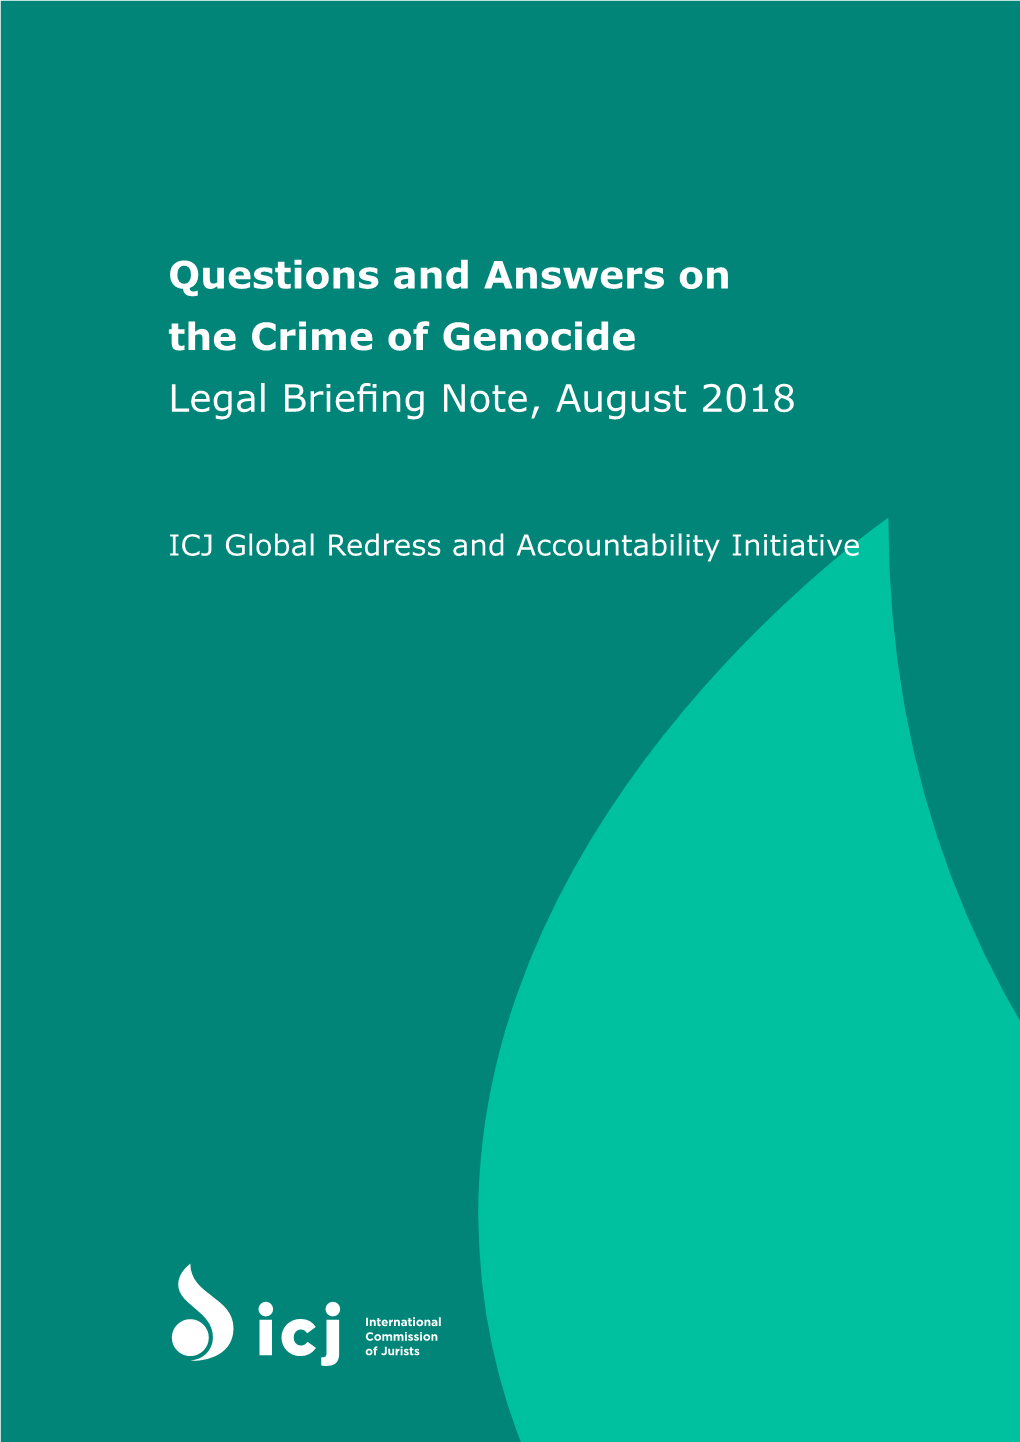 Questions and Answers on the Crime of Genocide Legal Briefing Note, August 2018